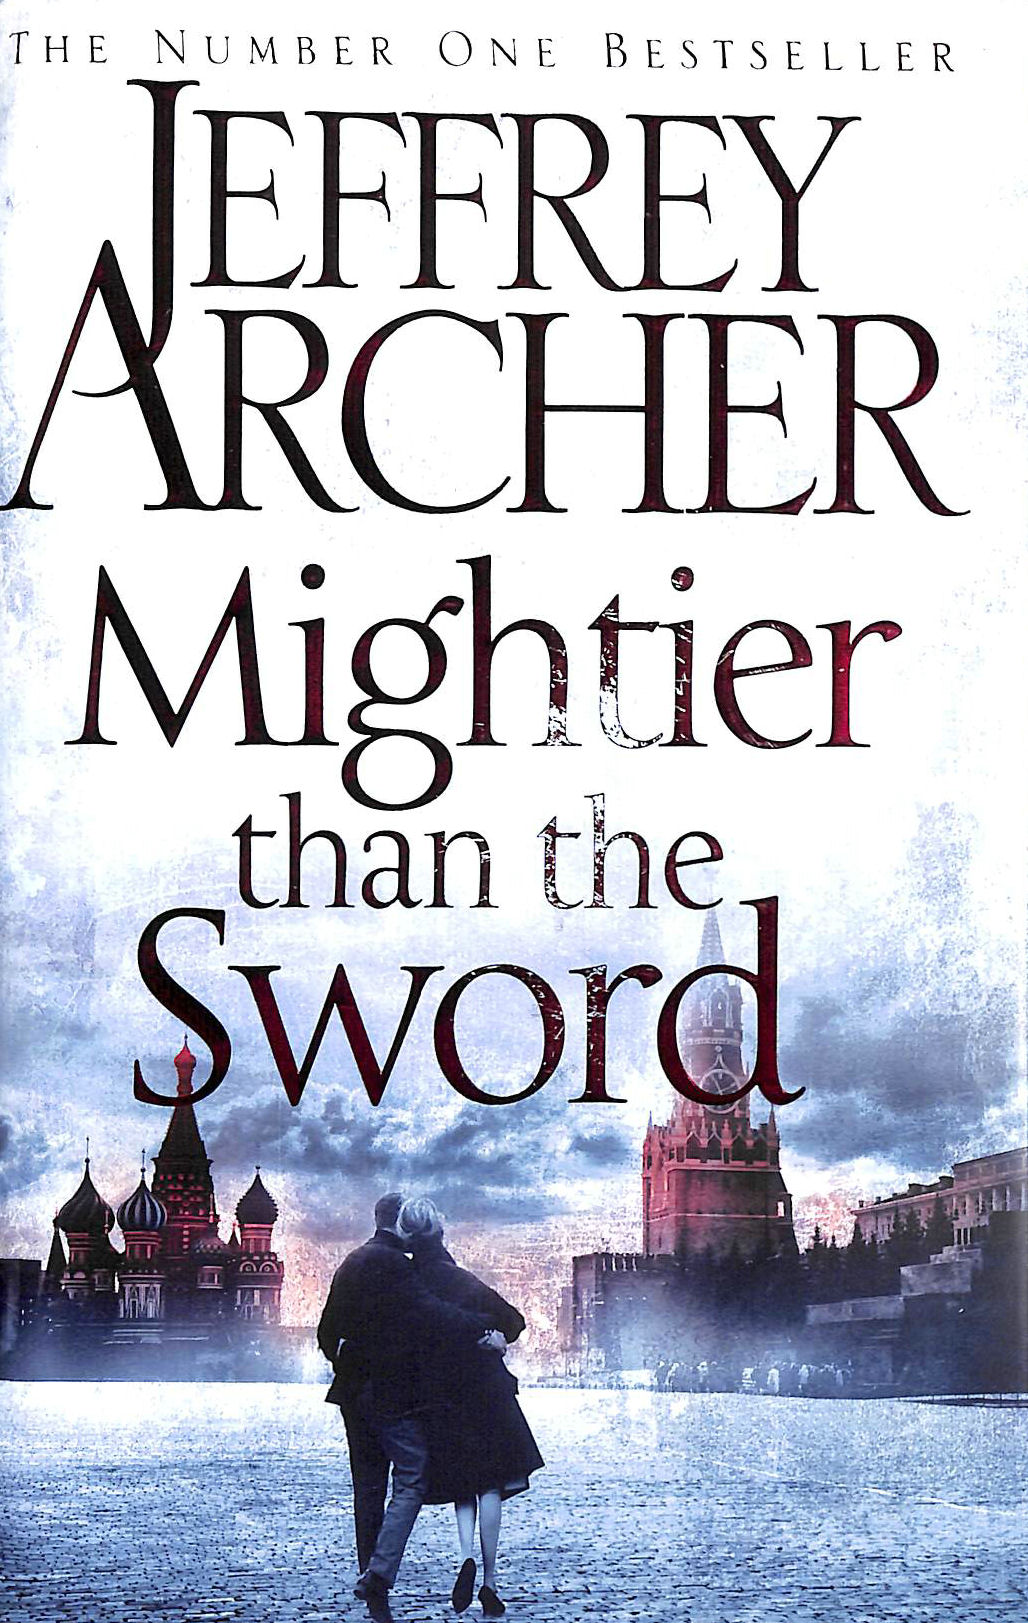 JEFFREY ARCHER - Mightier than the Sword (The Clifton Chronicles)